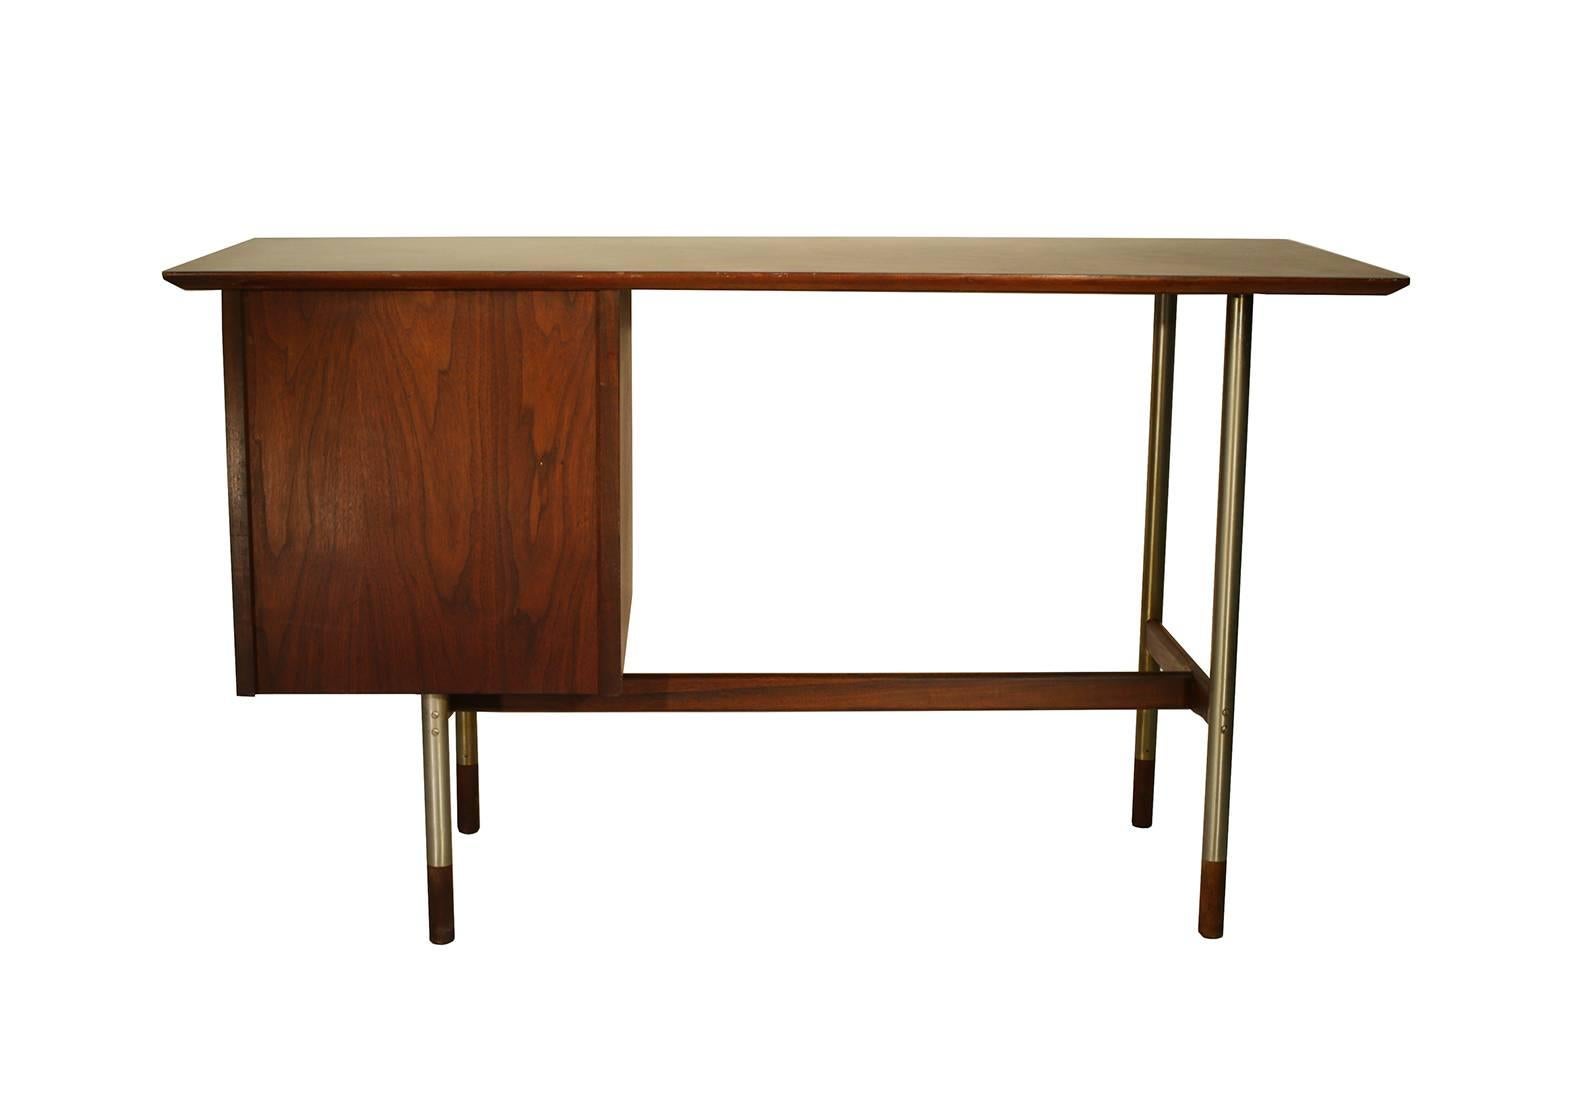 A beautiful Jack Cartwright for Founders freestanding desk. Chromed steel legs and teak frame and shoes. Right side with a drawer section and three front drawers.